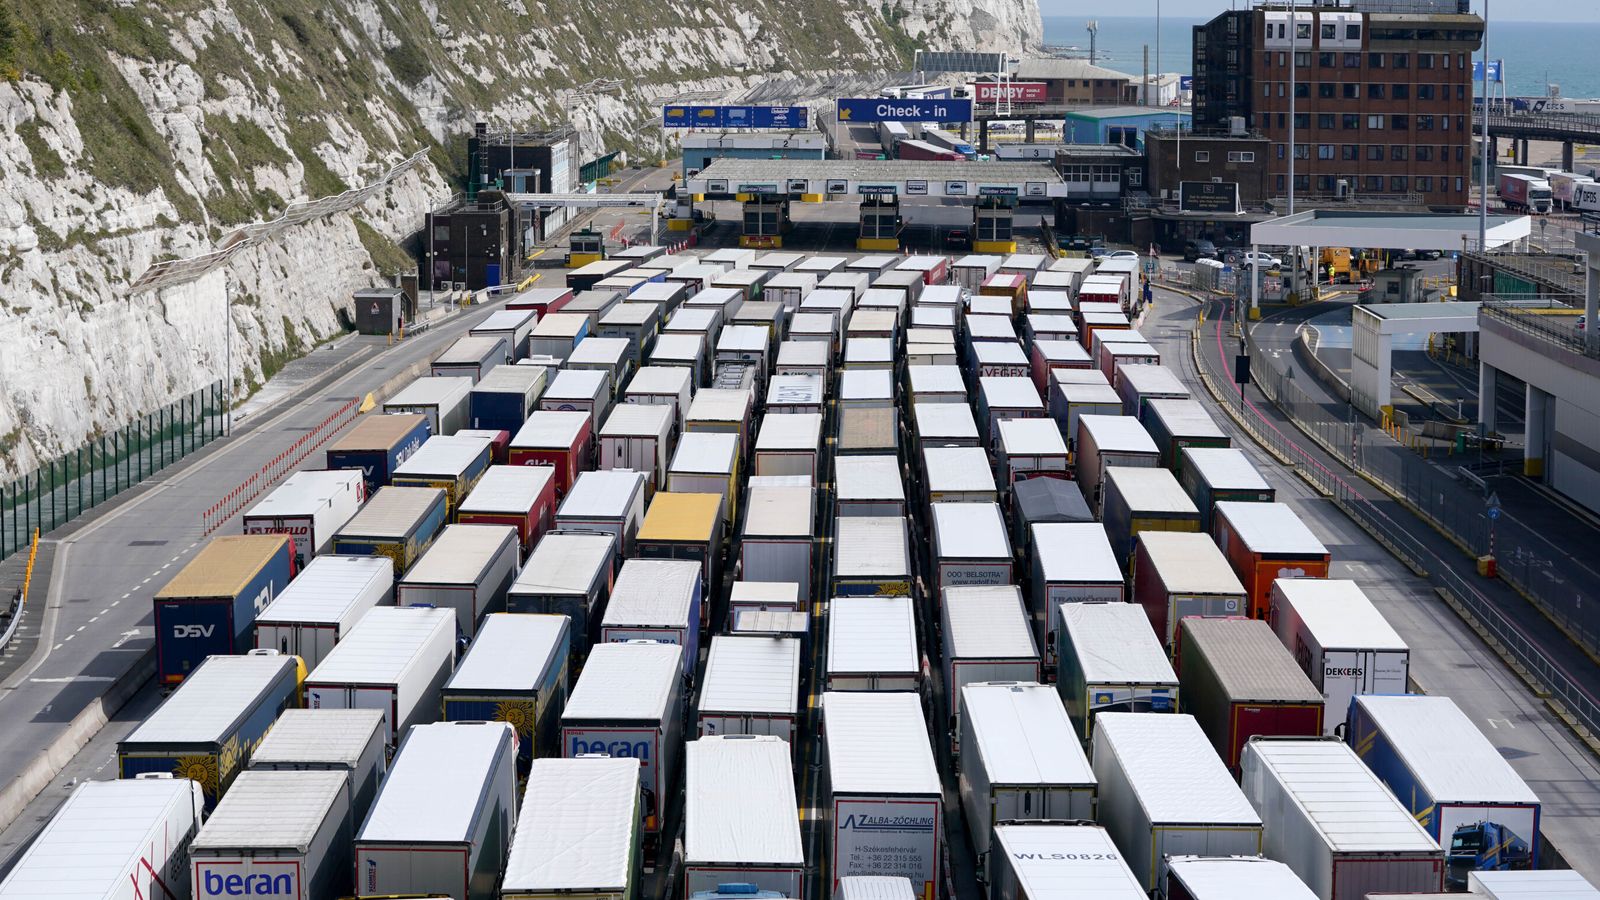 P&O Ferries' hopes of Dover crossings from Good Friday in doubt